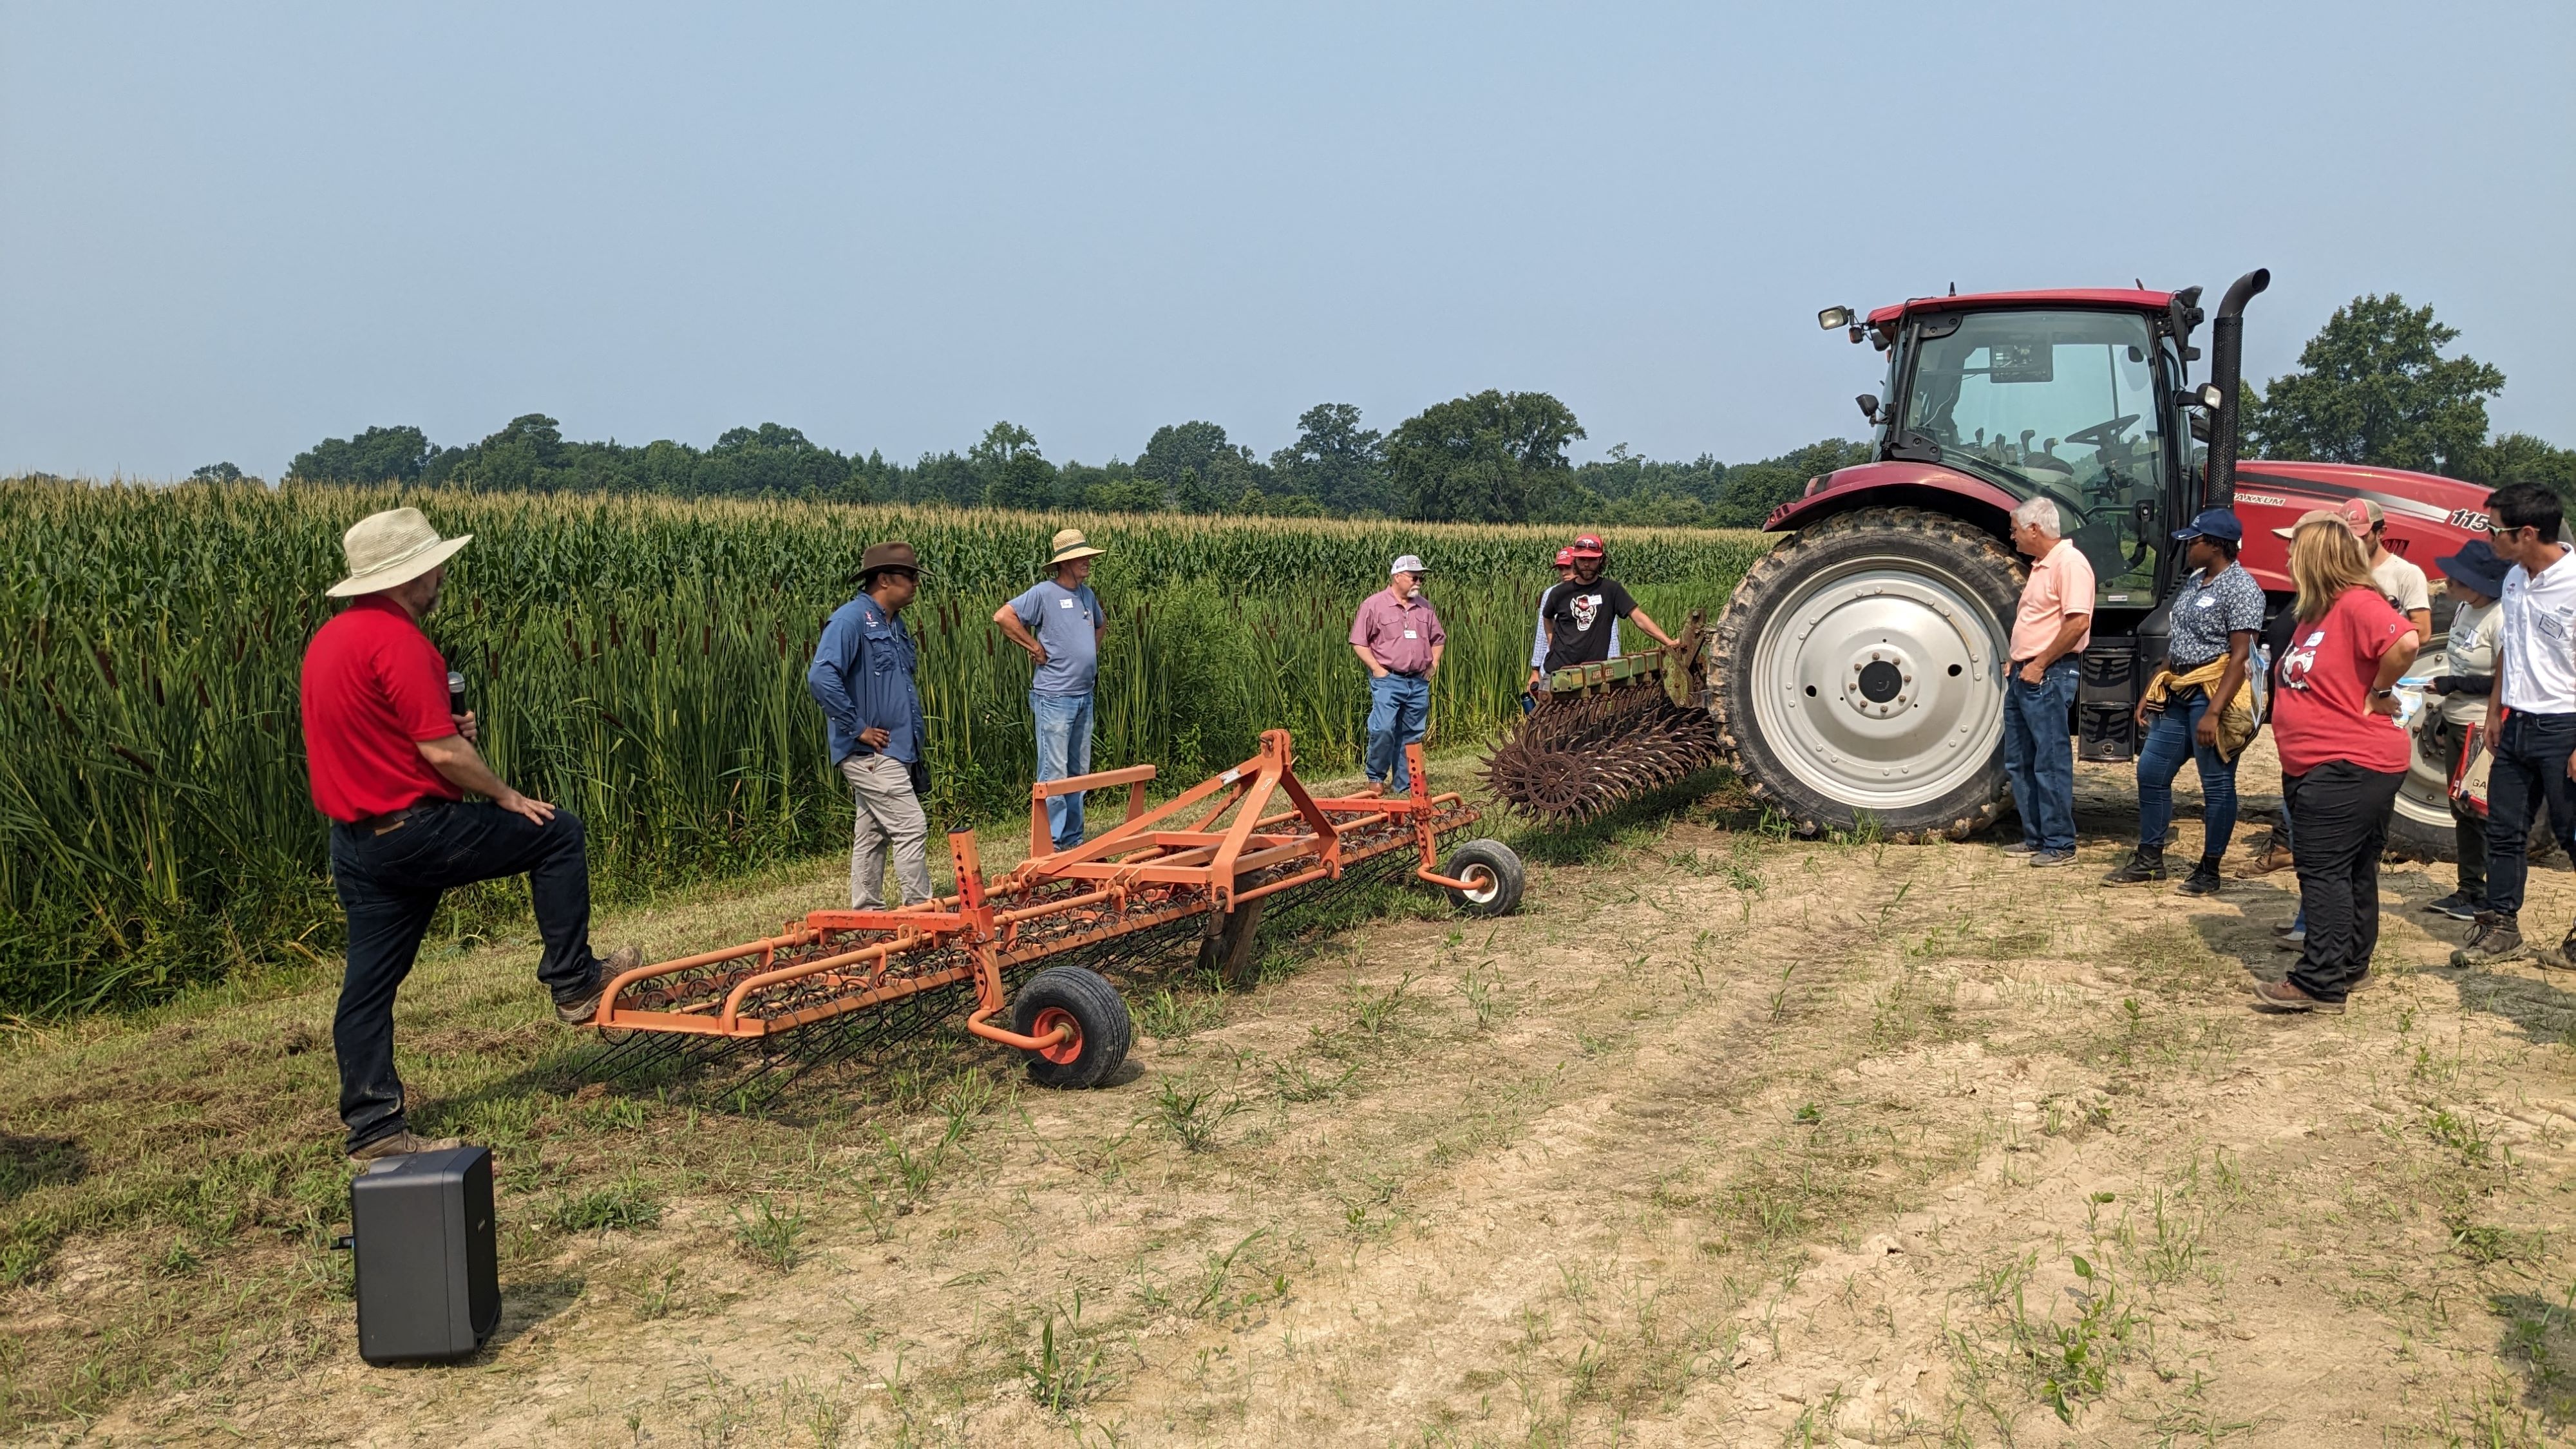 A group of farmers inspect equipment.